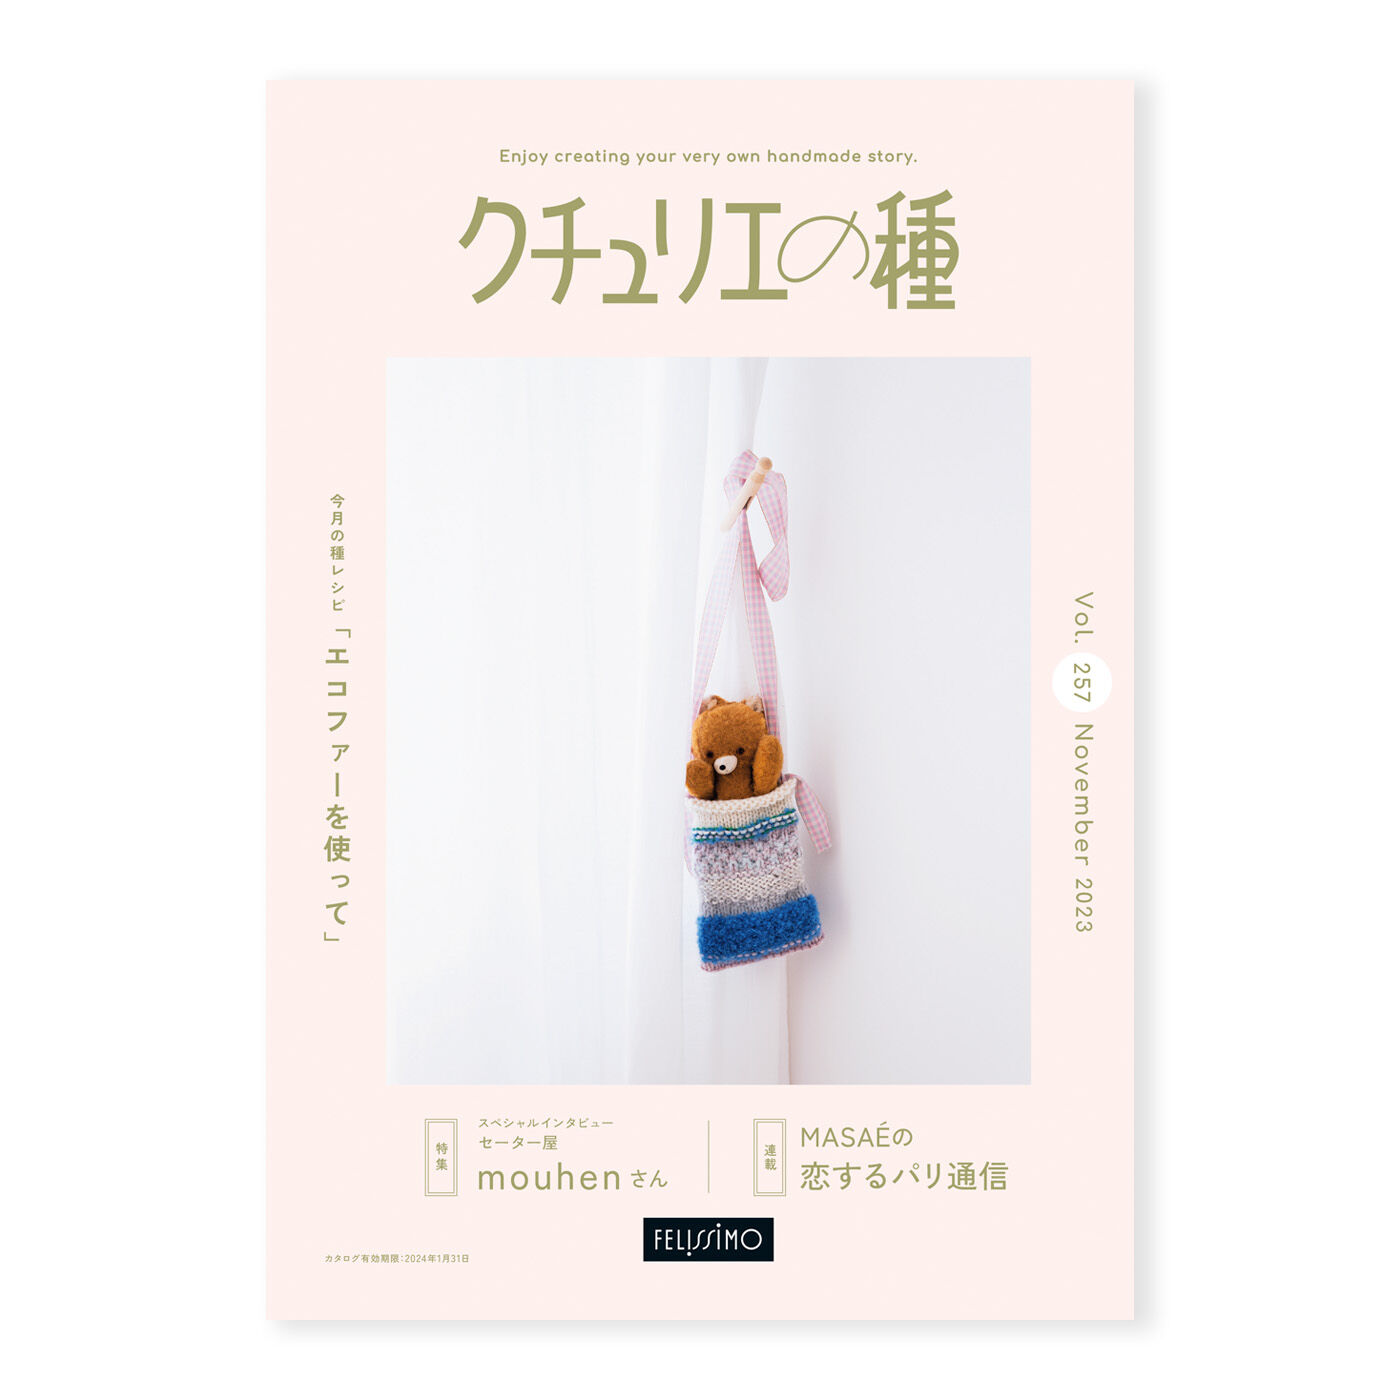 Couturier|「クチュリエクラブ」登録会費（年間登録）|クチュリエクラブ会員誌『クチュリエの種』